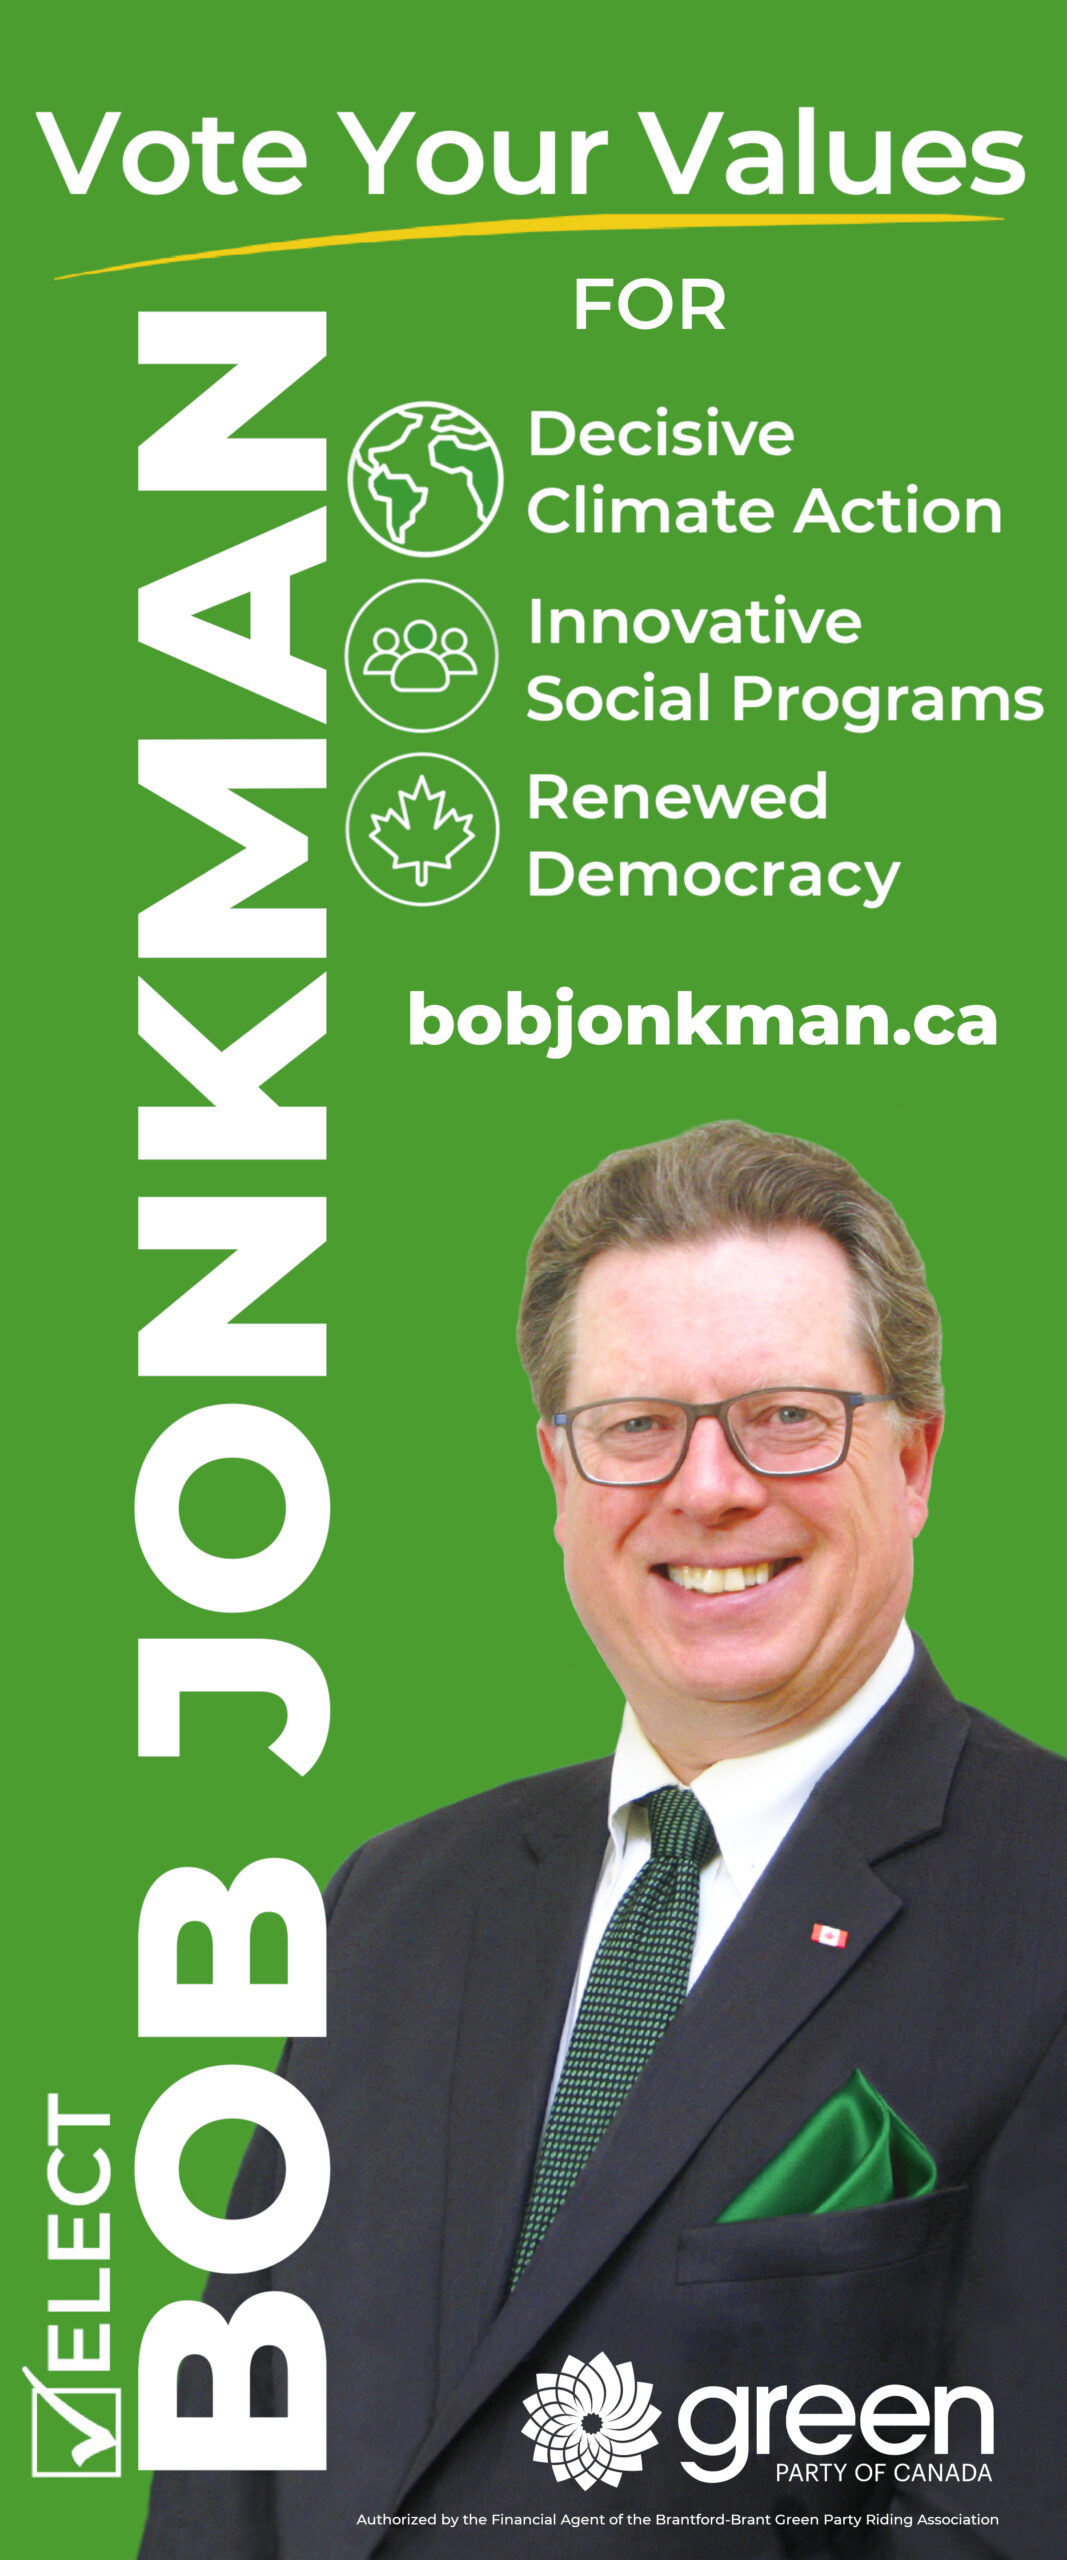 [Image: Bob Jonkman Candidate photo] Vote Your Values -90° TEXT [check mark in a box] ELECT BOB JONKMAN FOR [globe icon] Decisive Climate Action [people icon] Innovative Social Programs [maple leaf icon] Renewed Democracy bobjonkman.ca [logo] green PARTY OF CANADA Authorized by the Official Agent of the Bob Jonkman GPC campaign